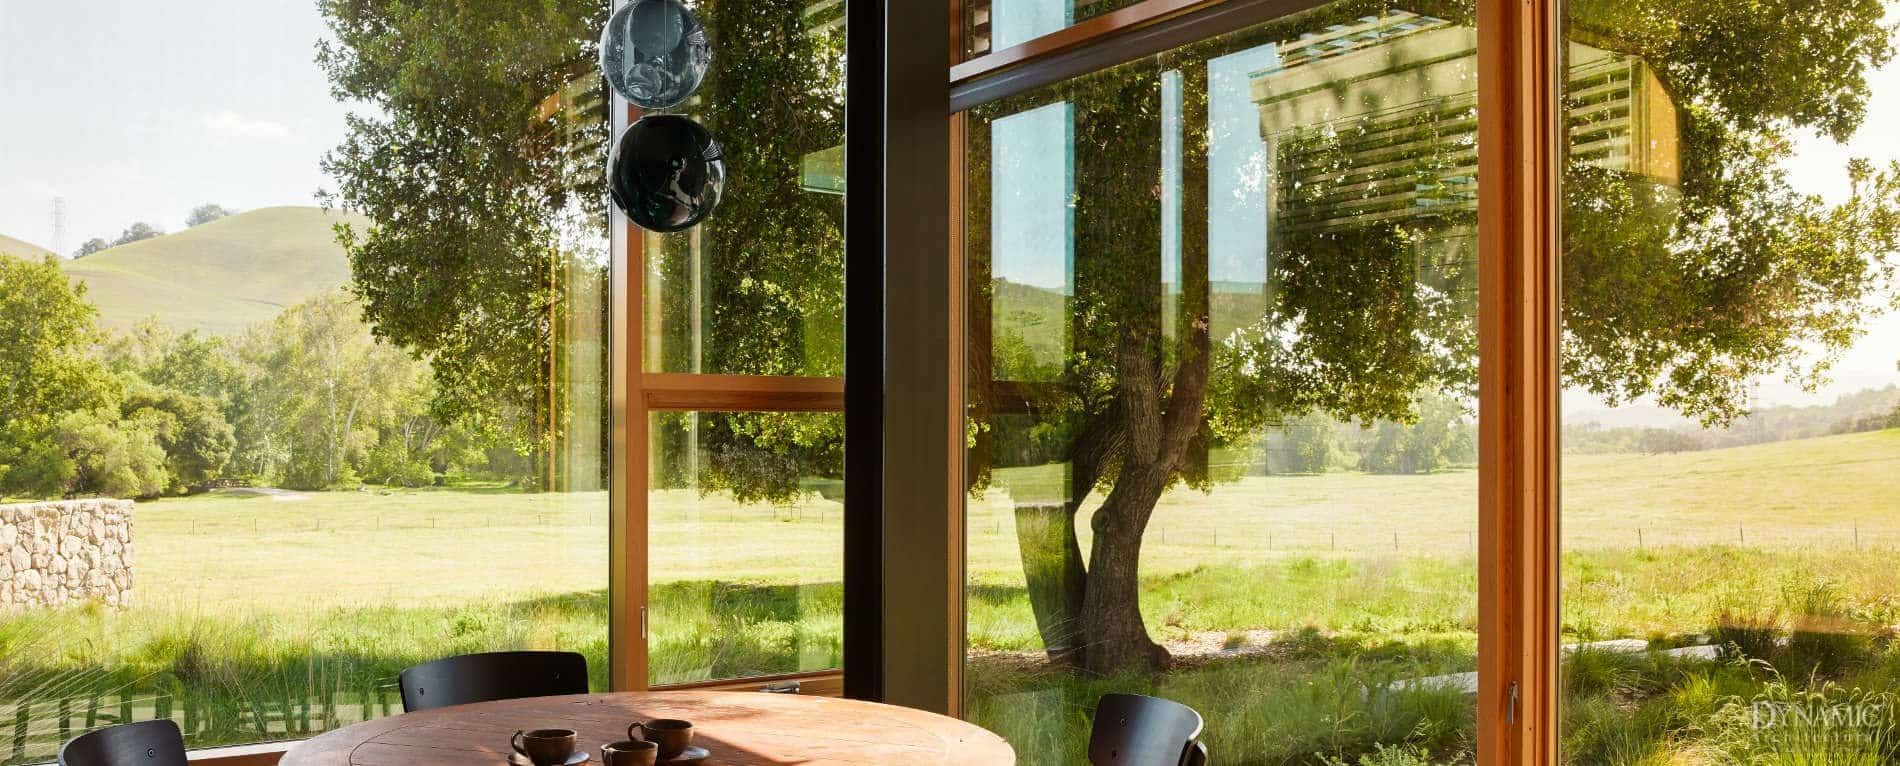 Residential wood storefront windows in a country home